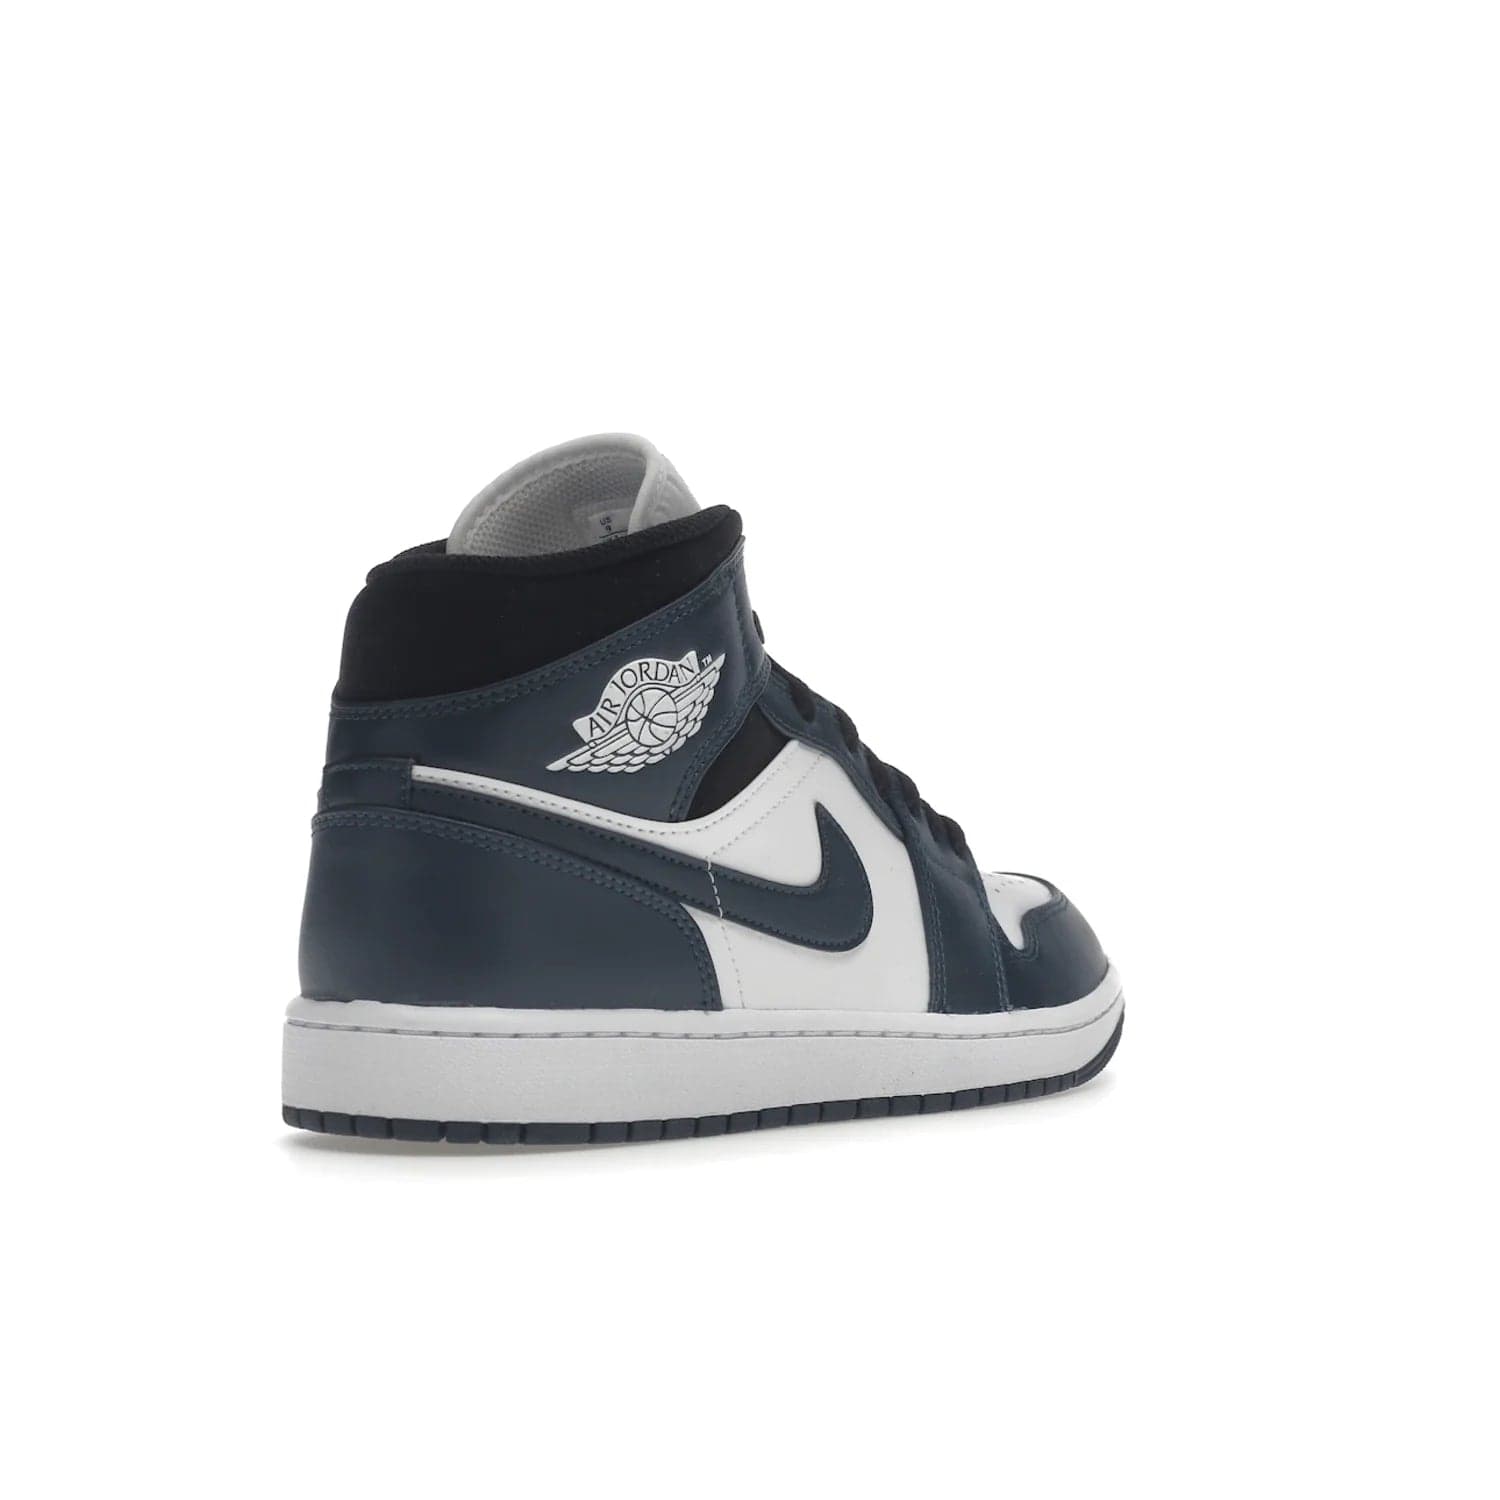 Jordan 1 Mid Armory Navy - Image 32 - Only at www.BallersClubKickz.com - The Jordan 1 Mid Armory Navy: classic basketball sneaker with soft white leather upper, deep navy blue overlays, and black leather ankle detailing. Iconic style with Jordan Wings logo and Jumpman label.